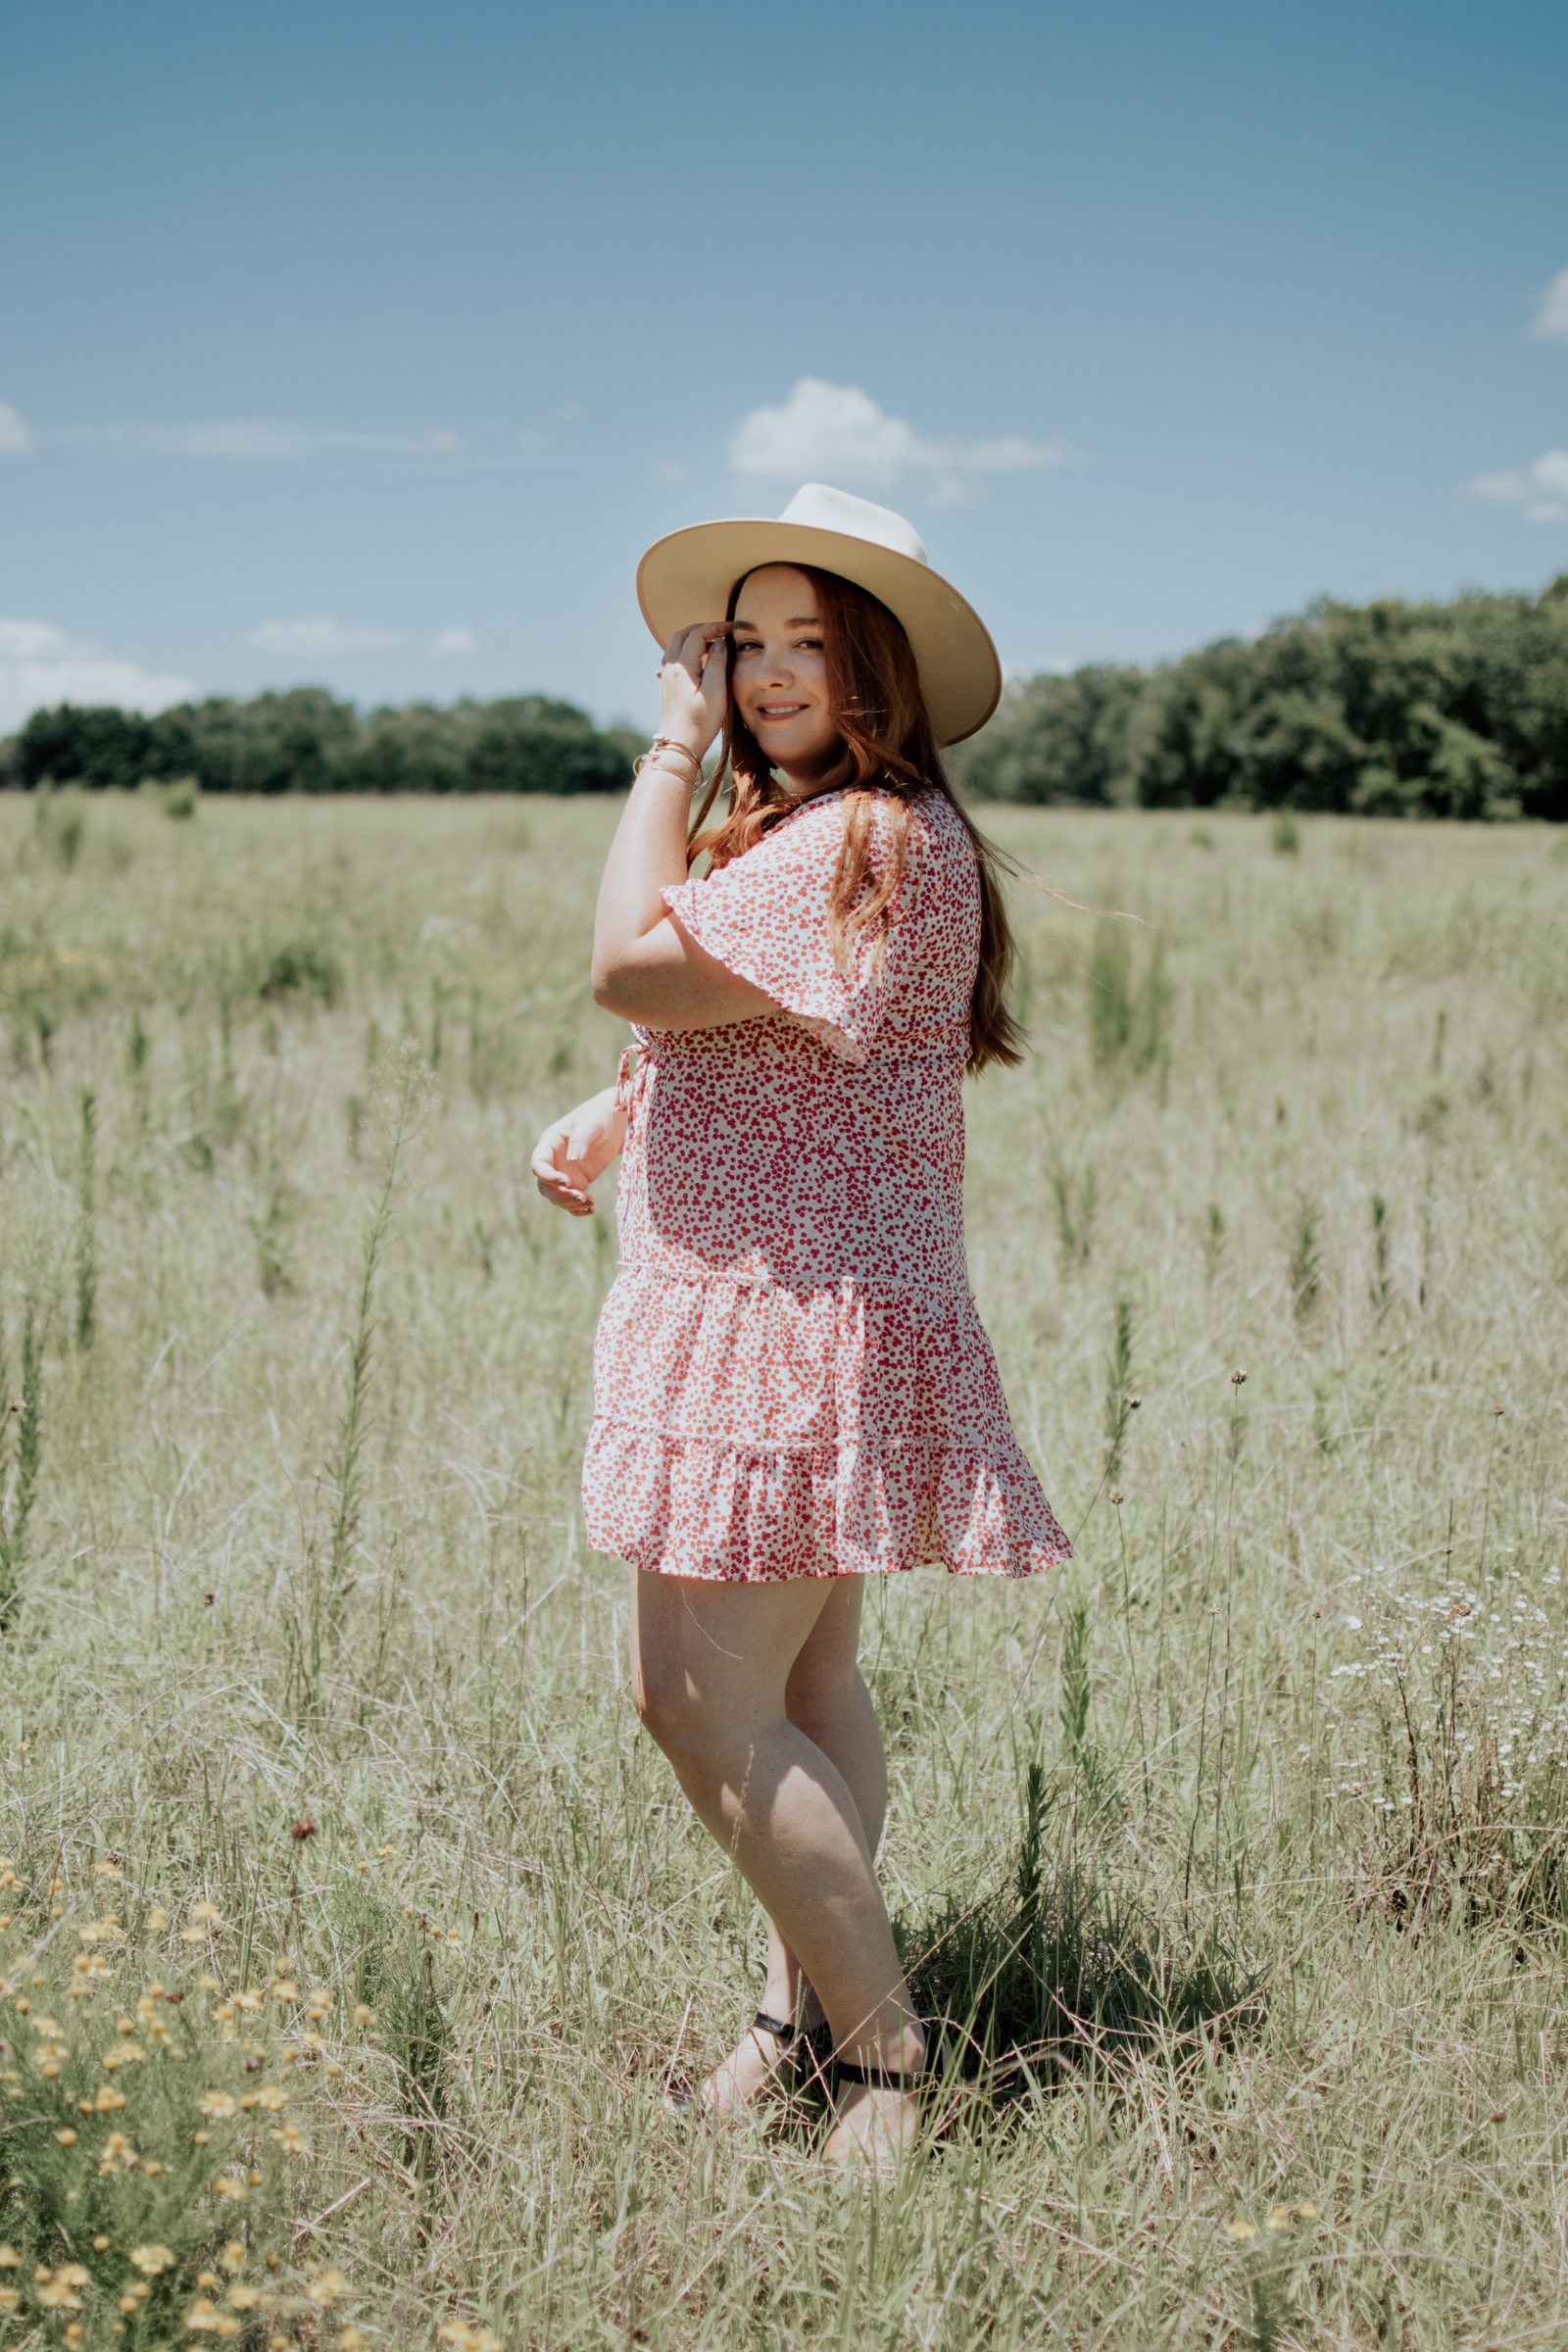 I did some photos in a farm i want to share! Dress: Shein Curve